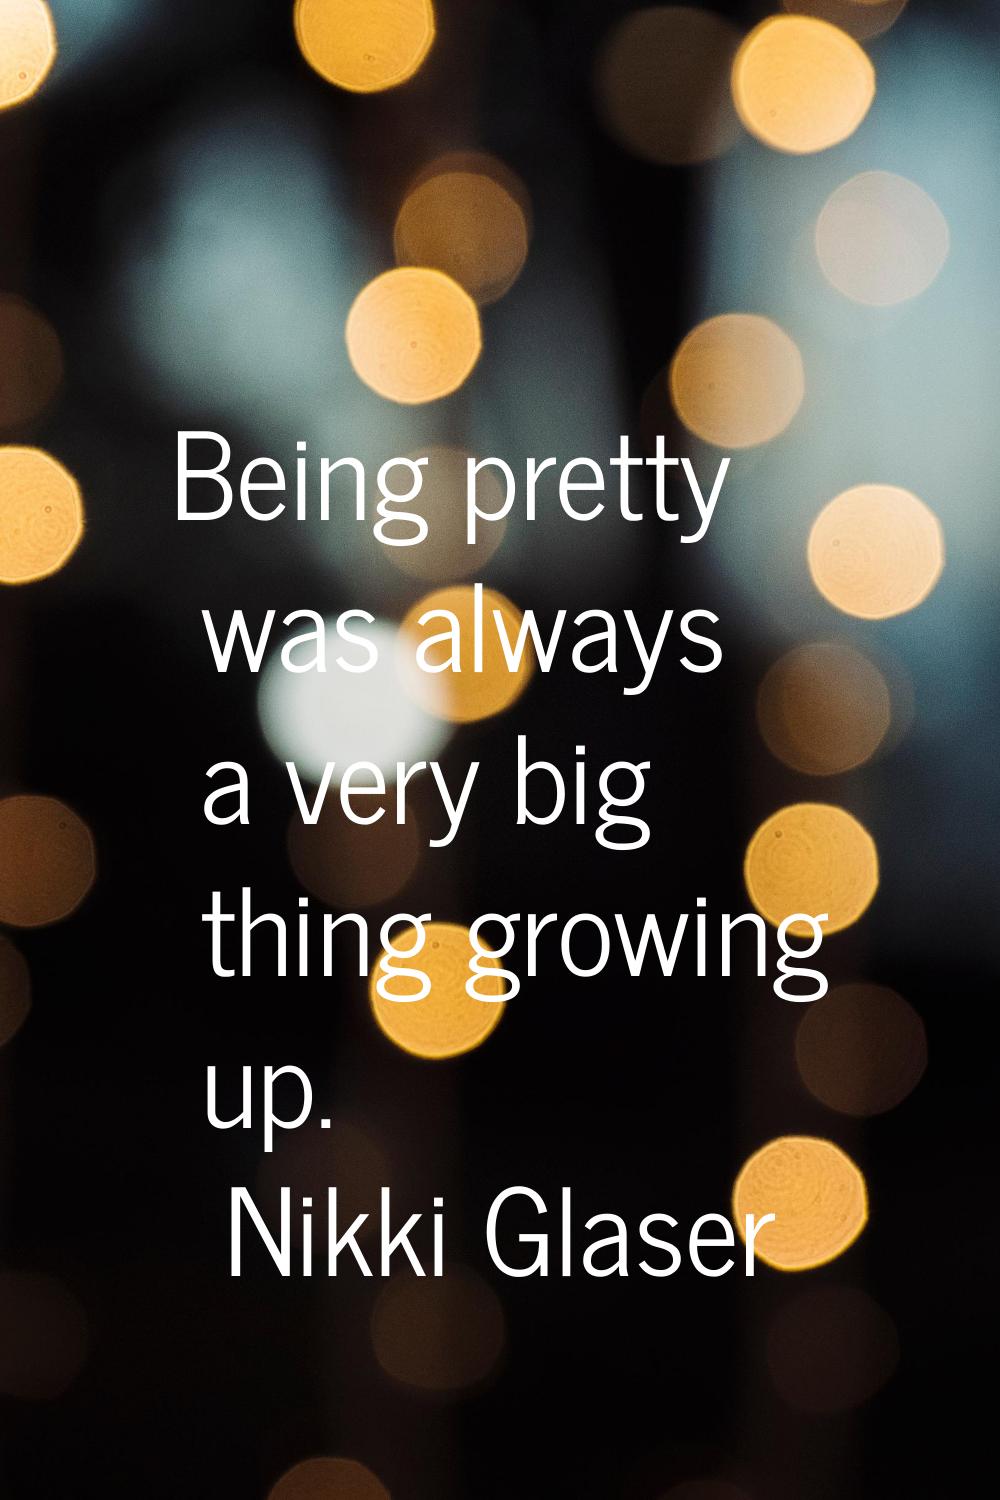 Being pretty was always a very big thing growing up.